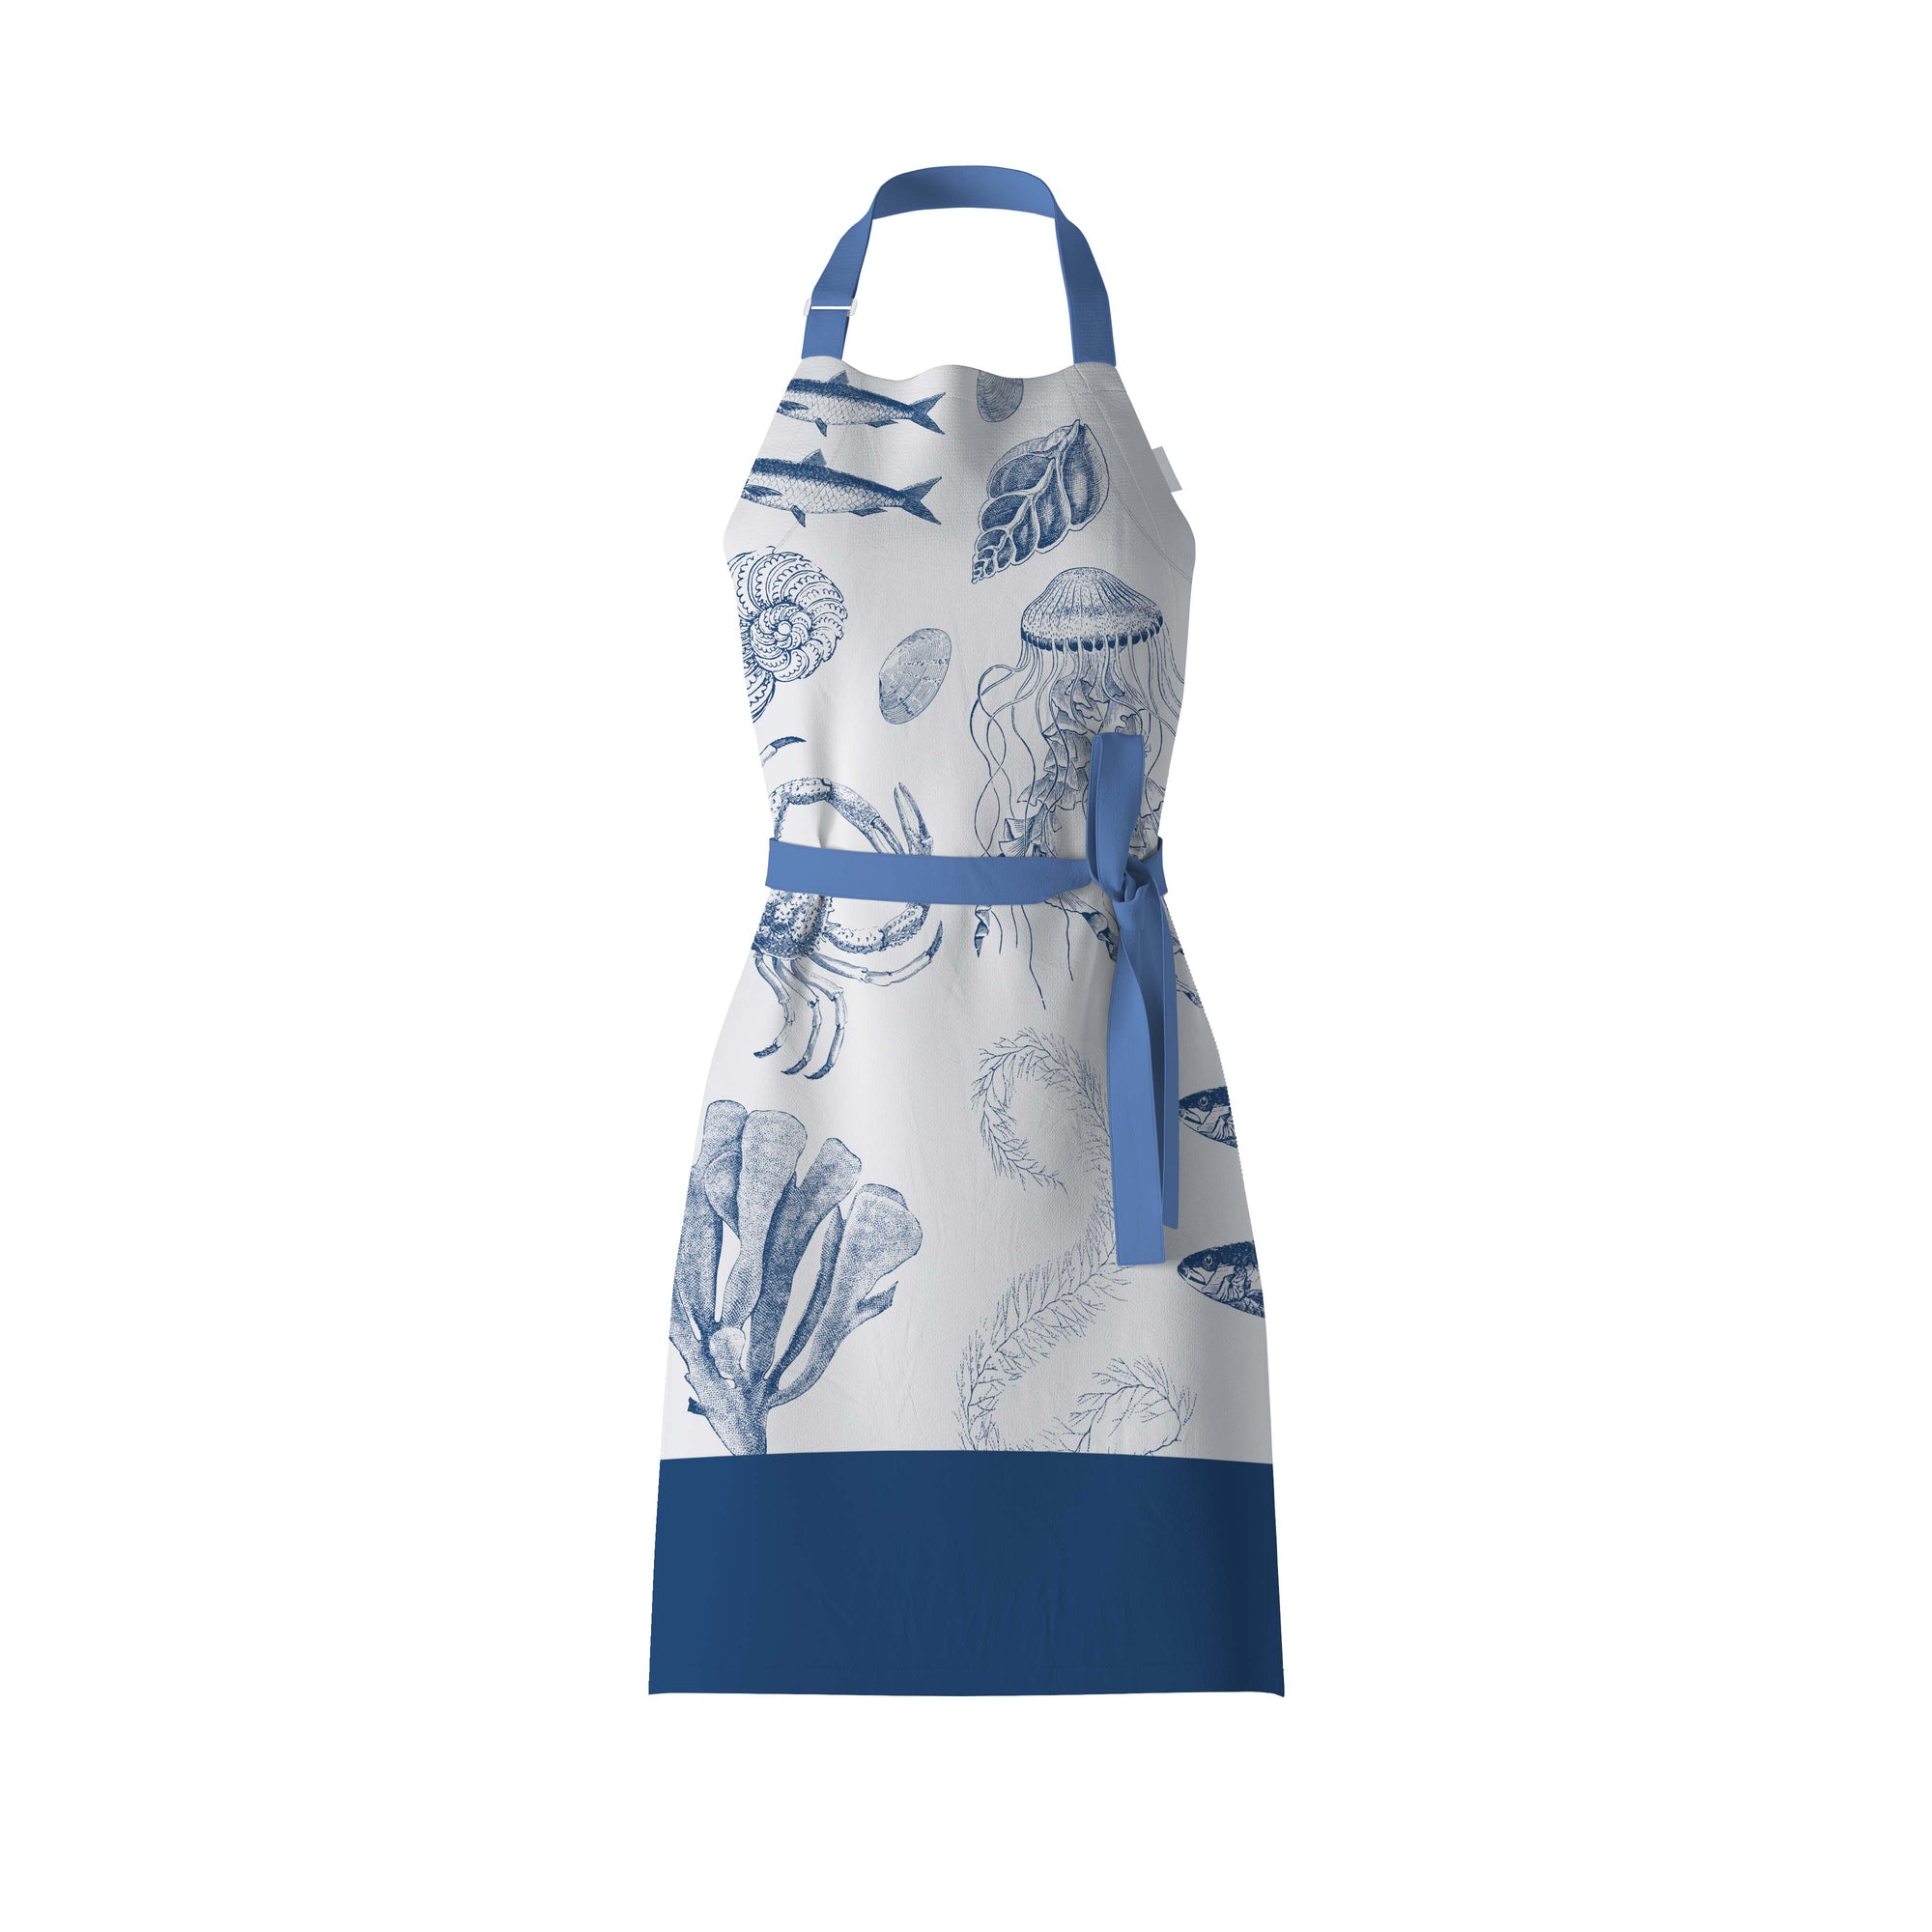 Antiquarian sealife adult bib apron with white cotton body with a blue print of jellyfish, crab, seaweed, fossils and fish with blue cotton neck and waste ties. Blue block at the bottom of the apron. From Mustard and Gray. On isolated background. 